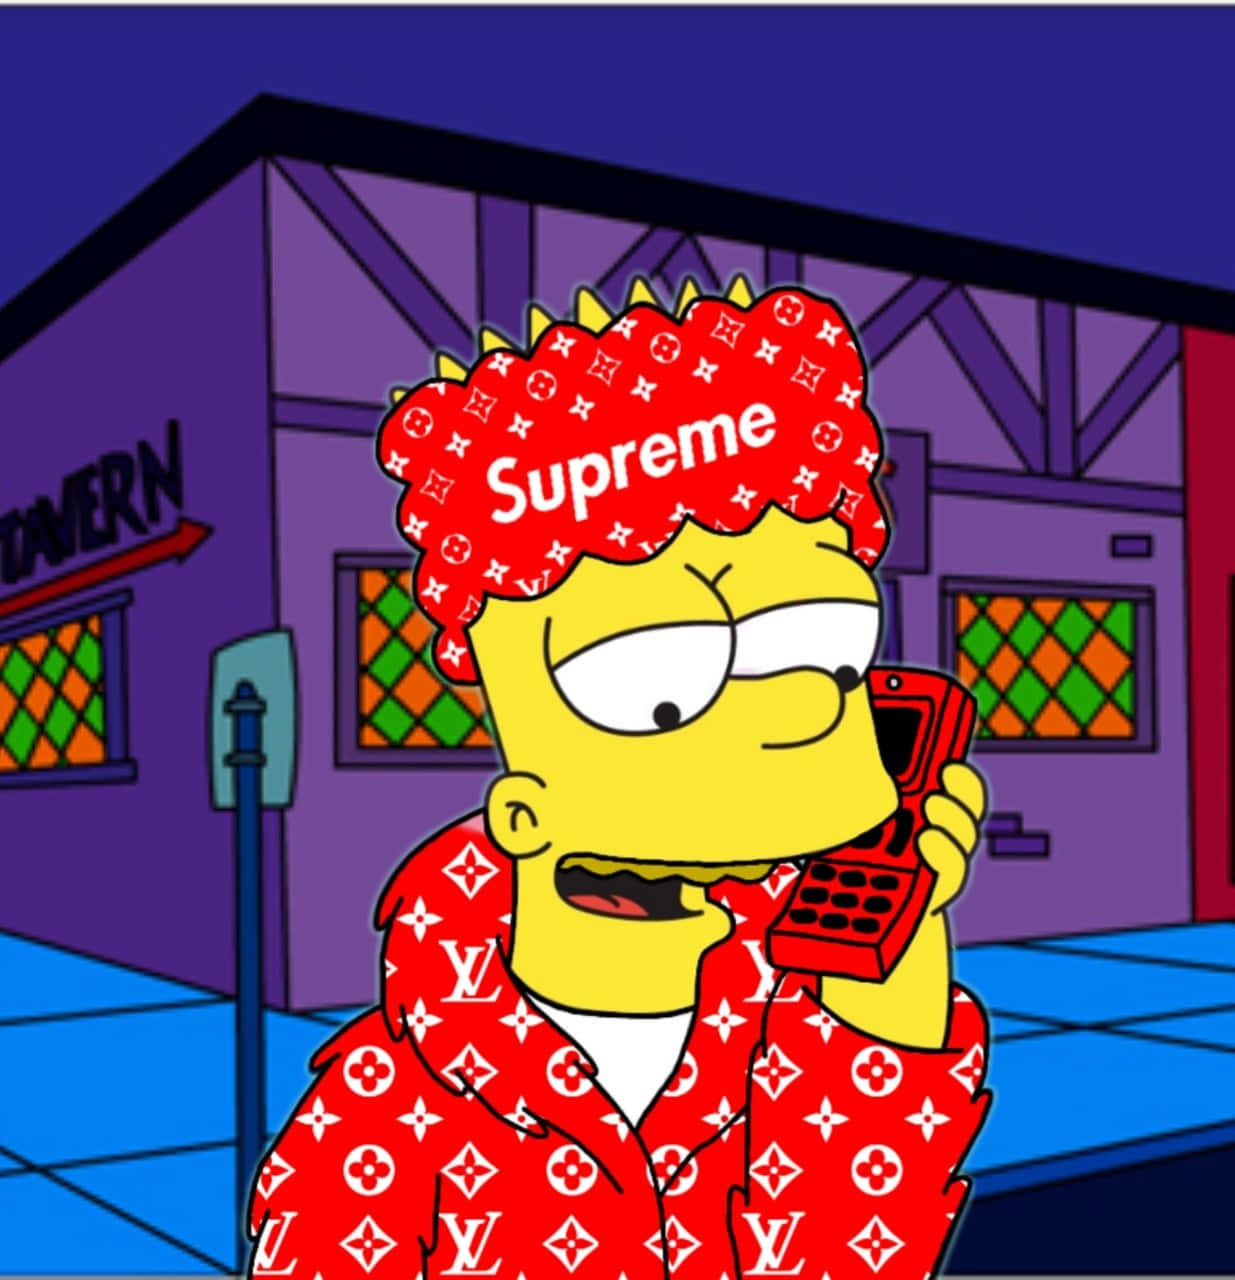 Supreme Bart Simpson flexes his style and swagger Wallpaper